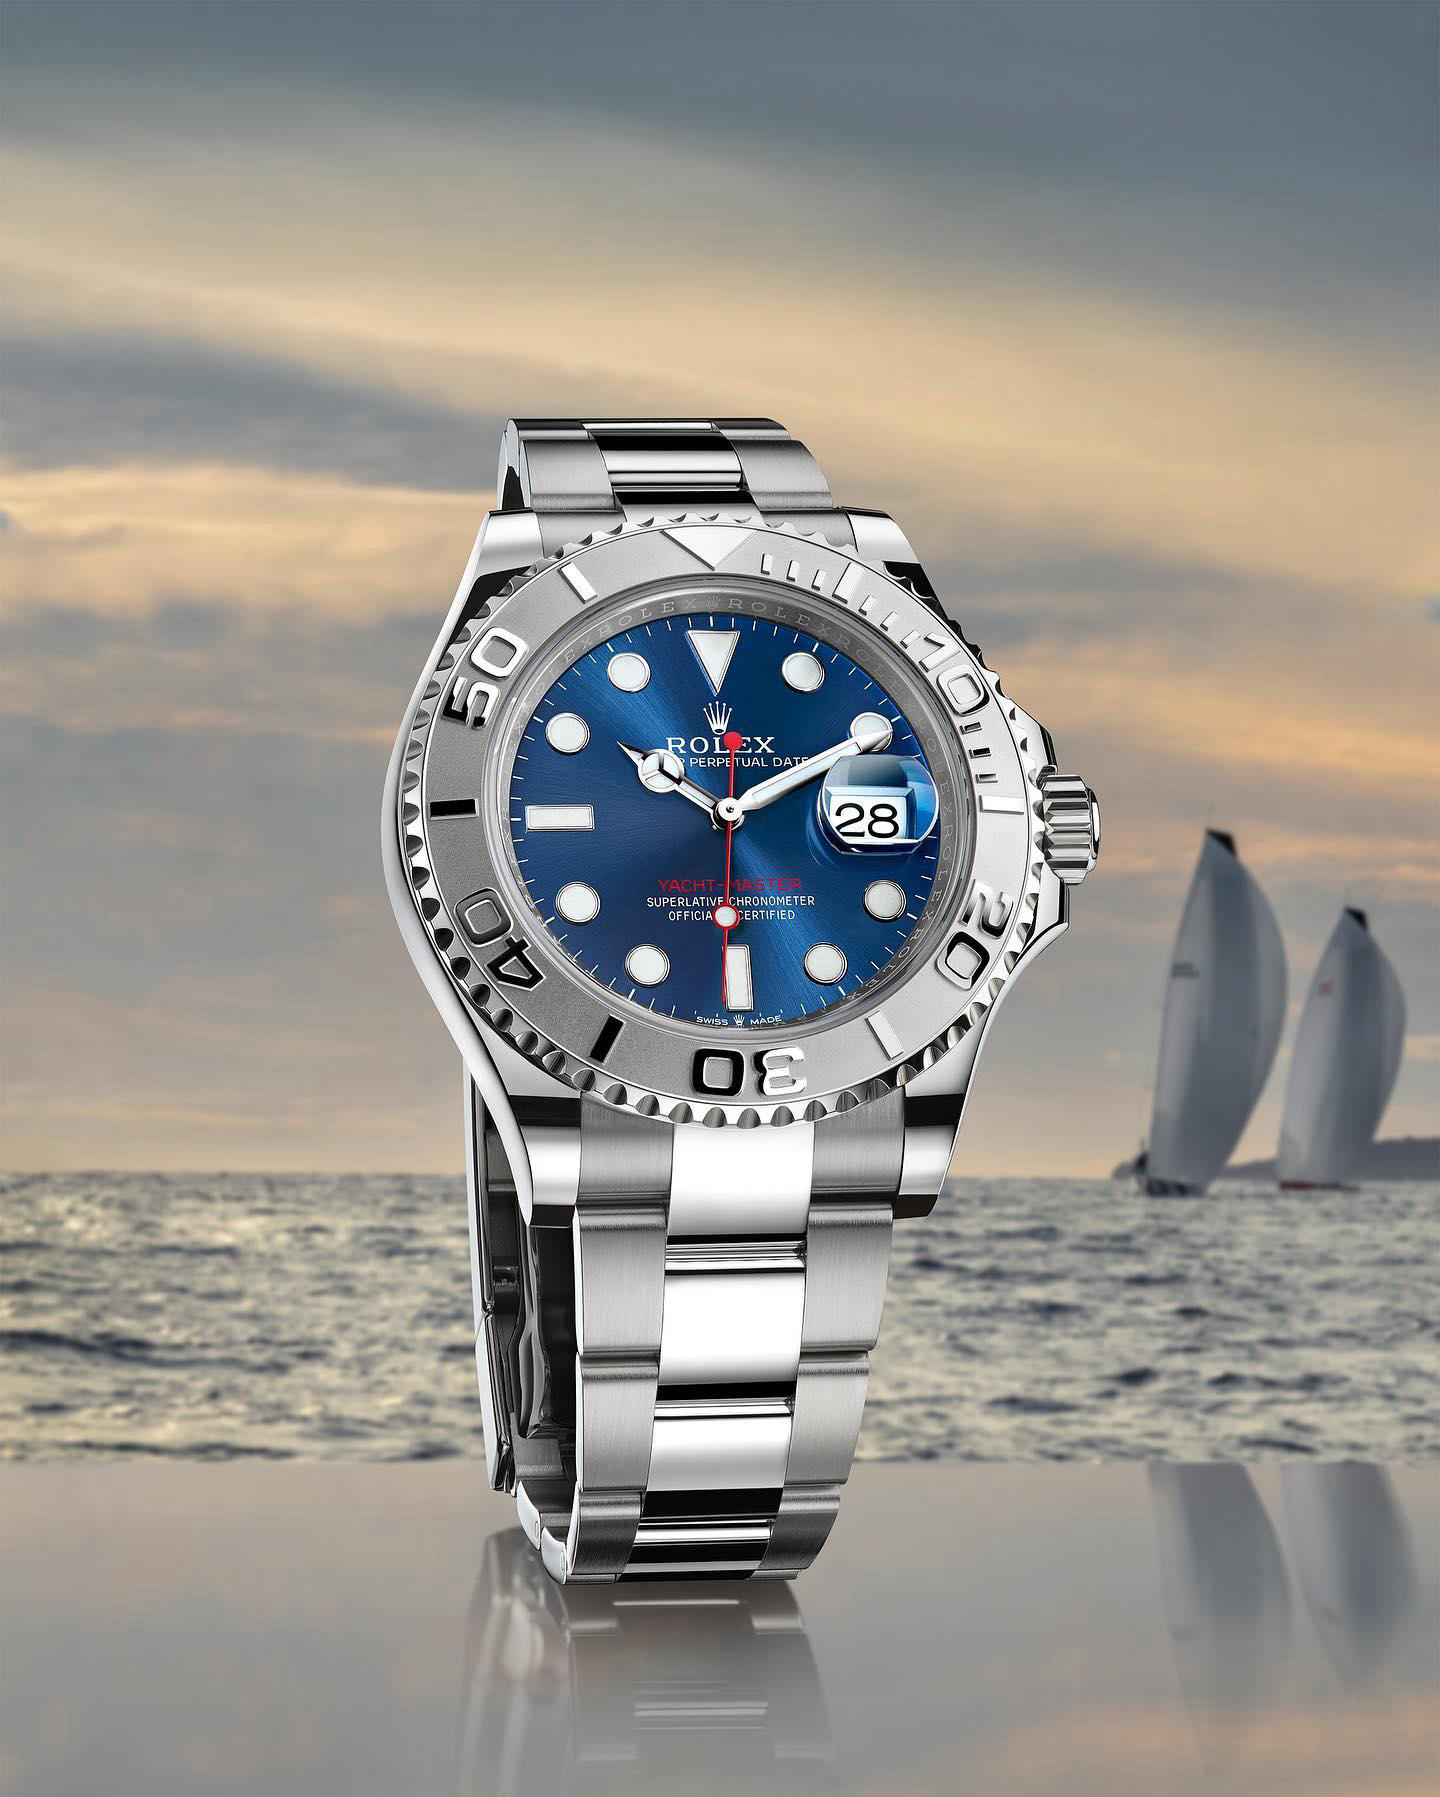 image  1 ROLEX - The Yacht-Master 40 in a Rolesium version features a rotatable bezel crafted in platinum, an